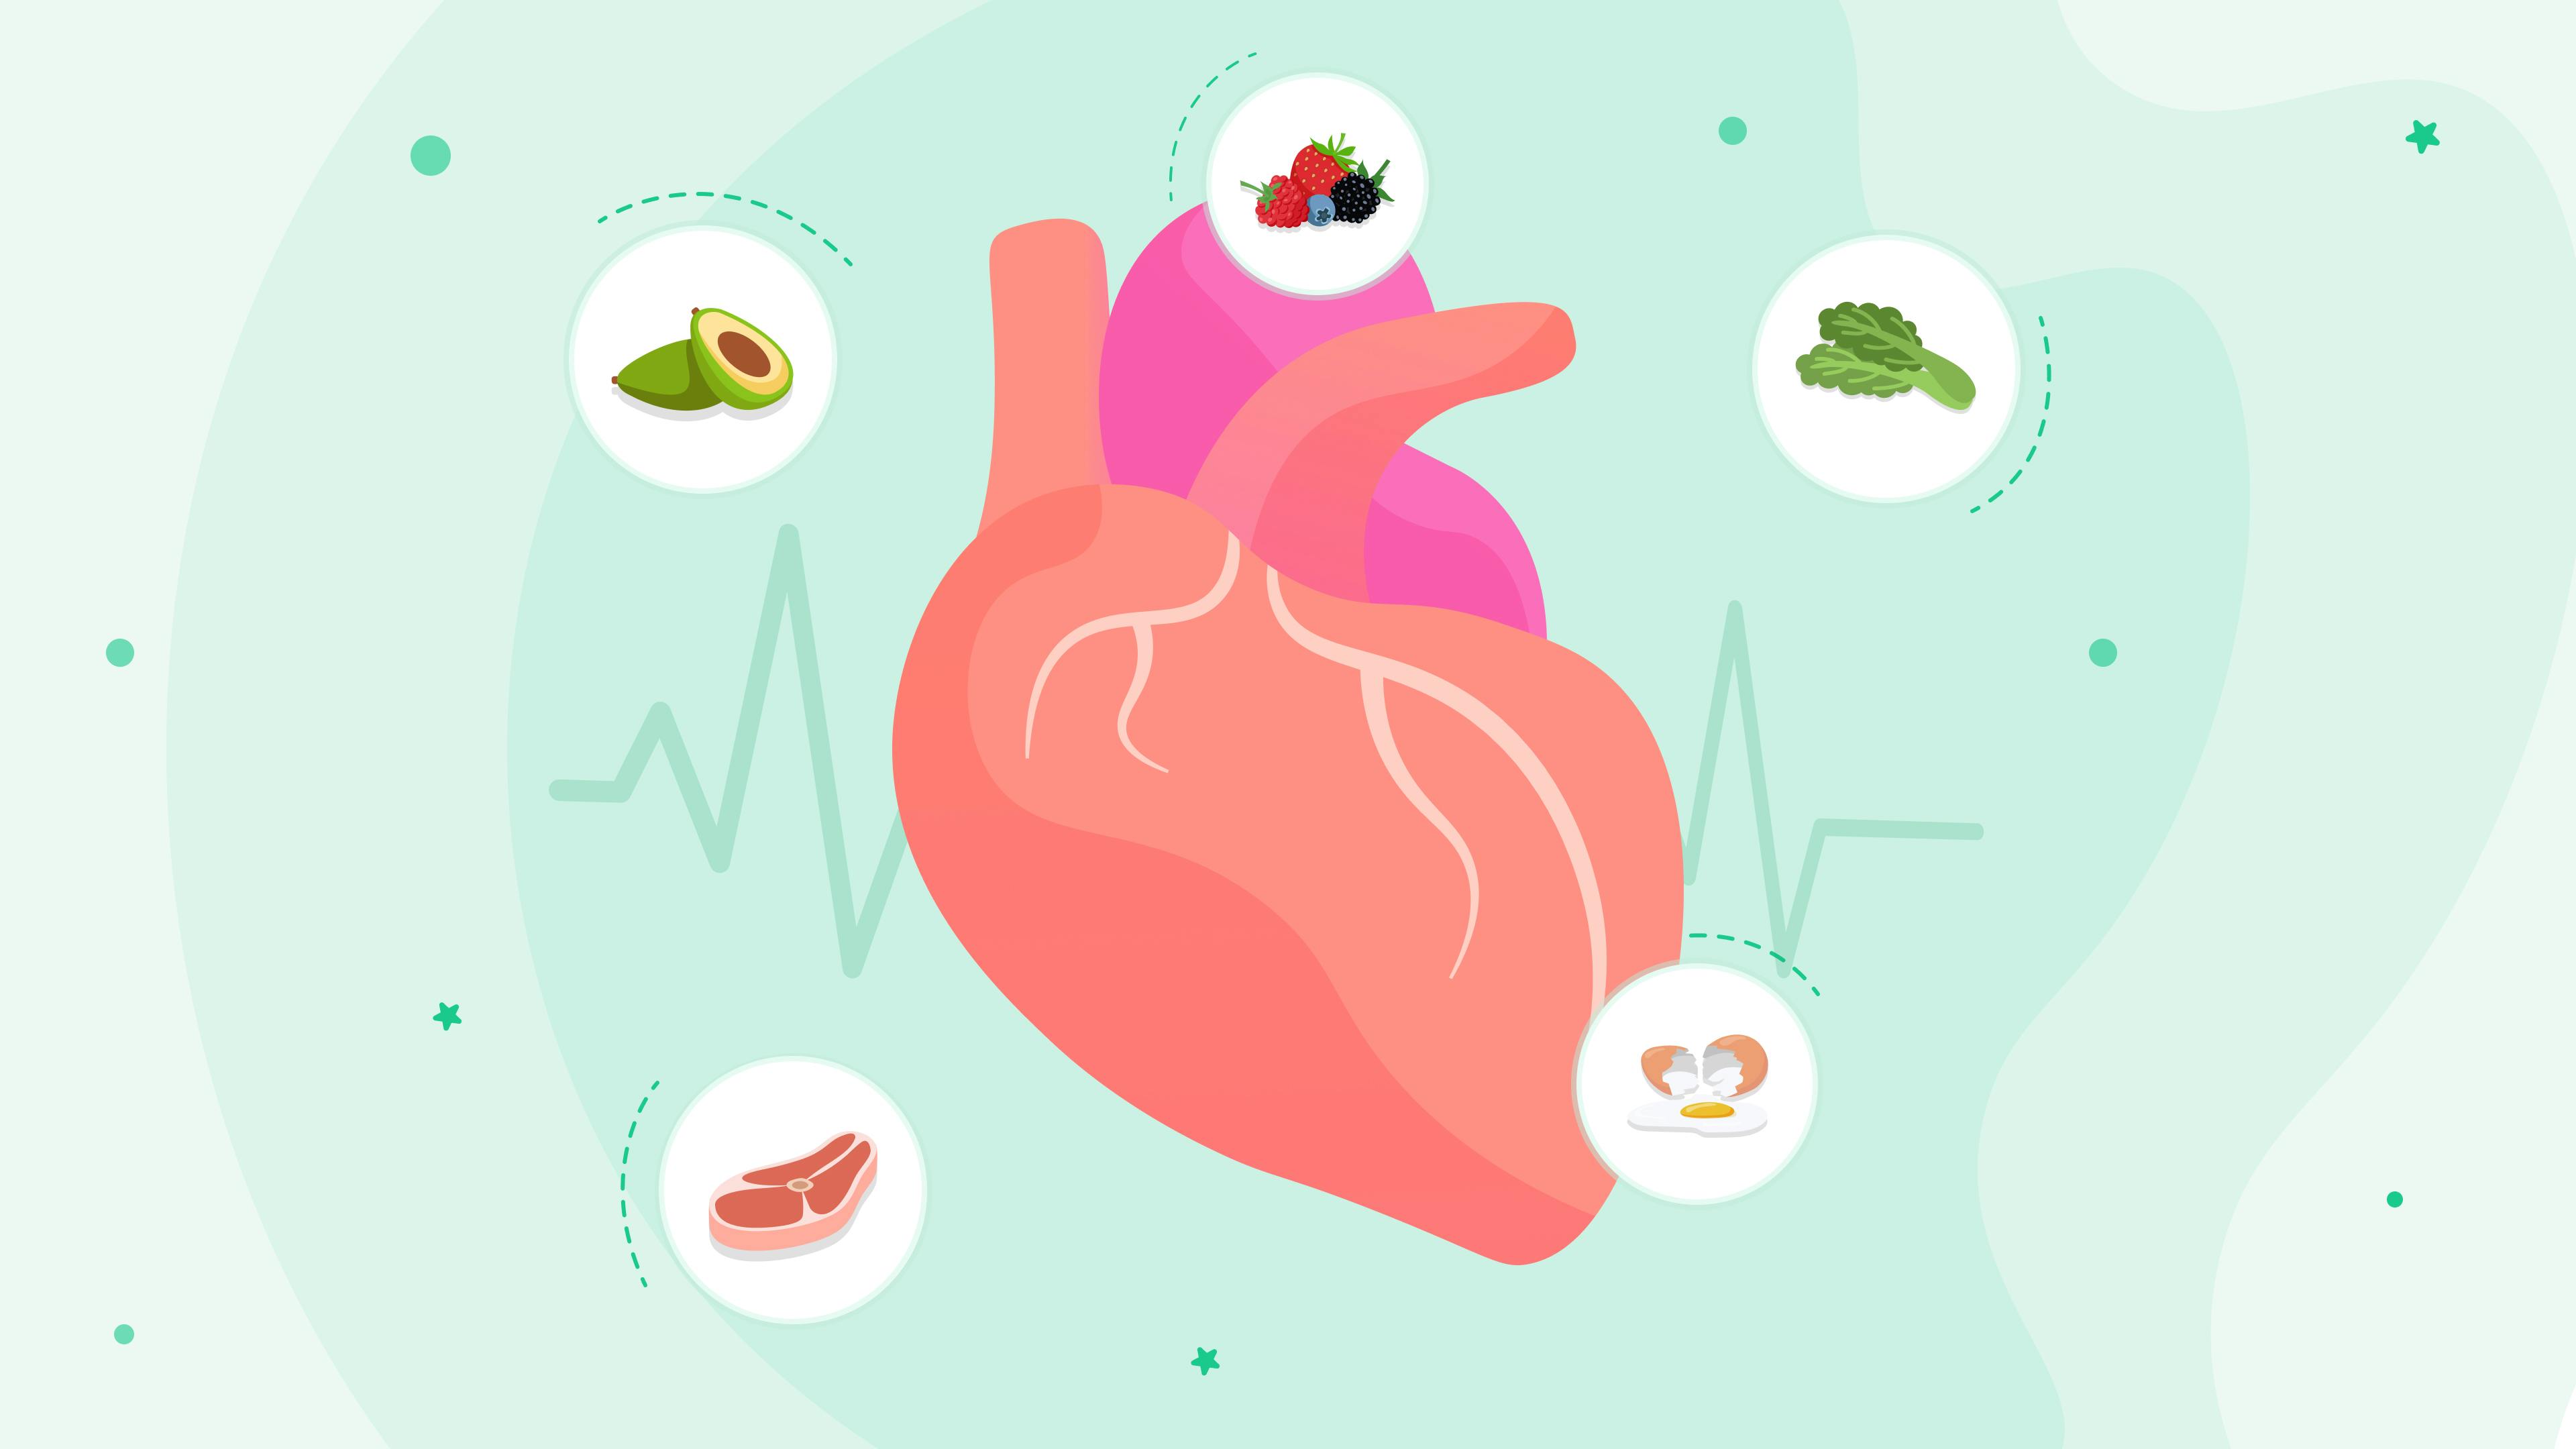 Keto Diet and Heart Health: Facts, Risks, Foods to Avoid